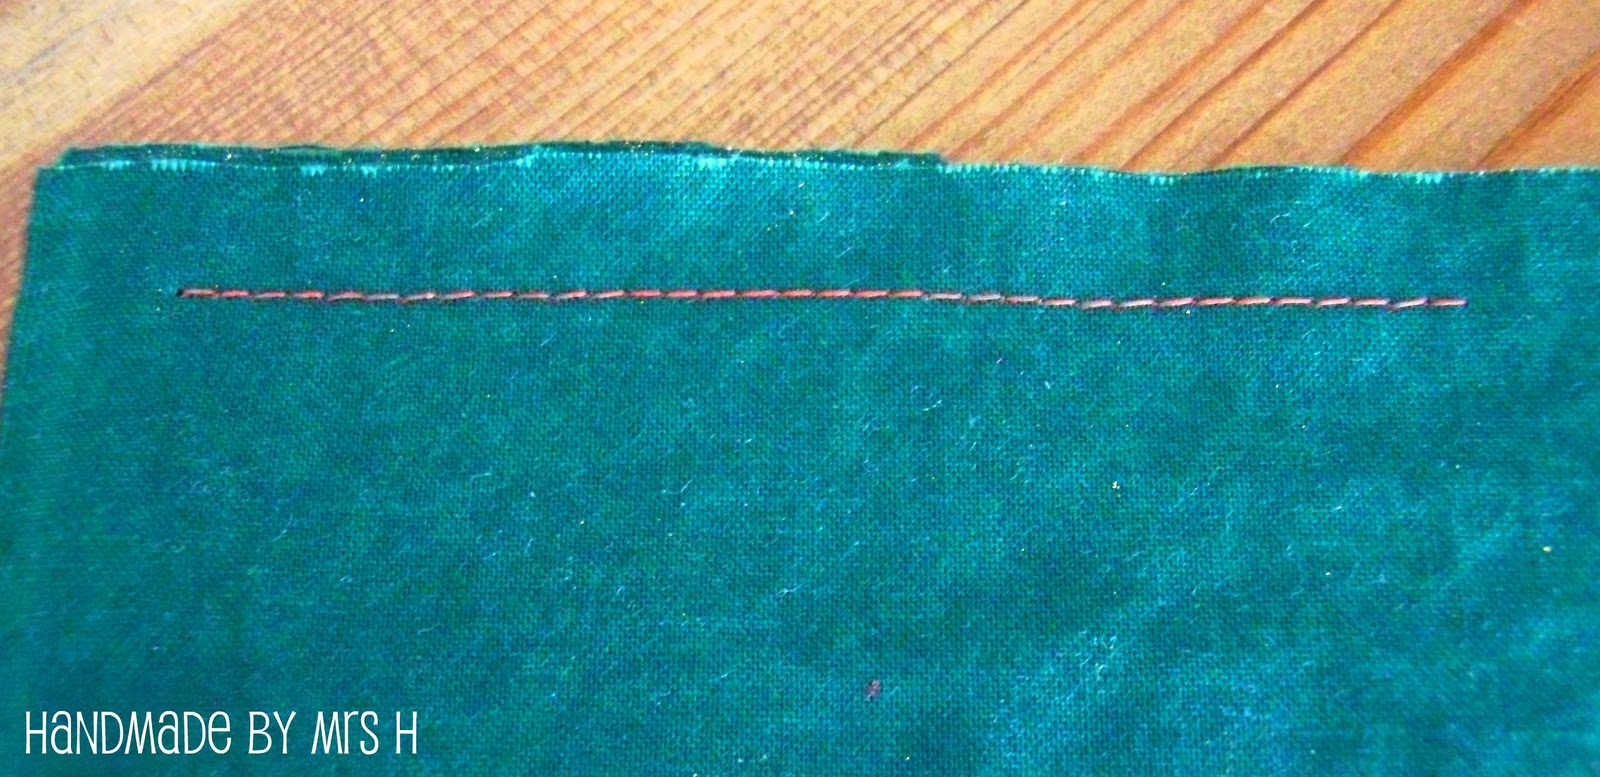 Mrs H - the blog: No need for backstitch!